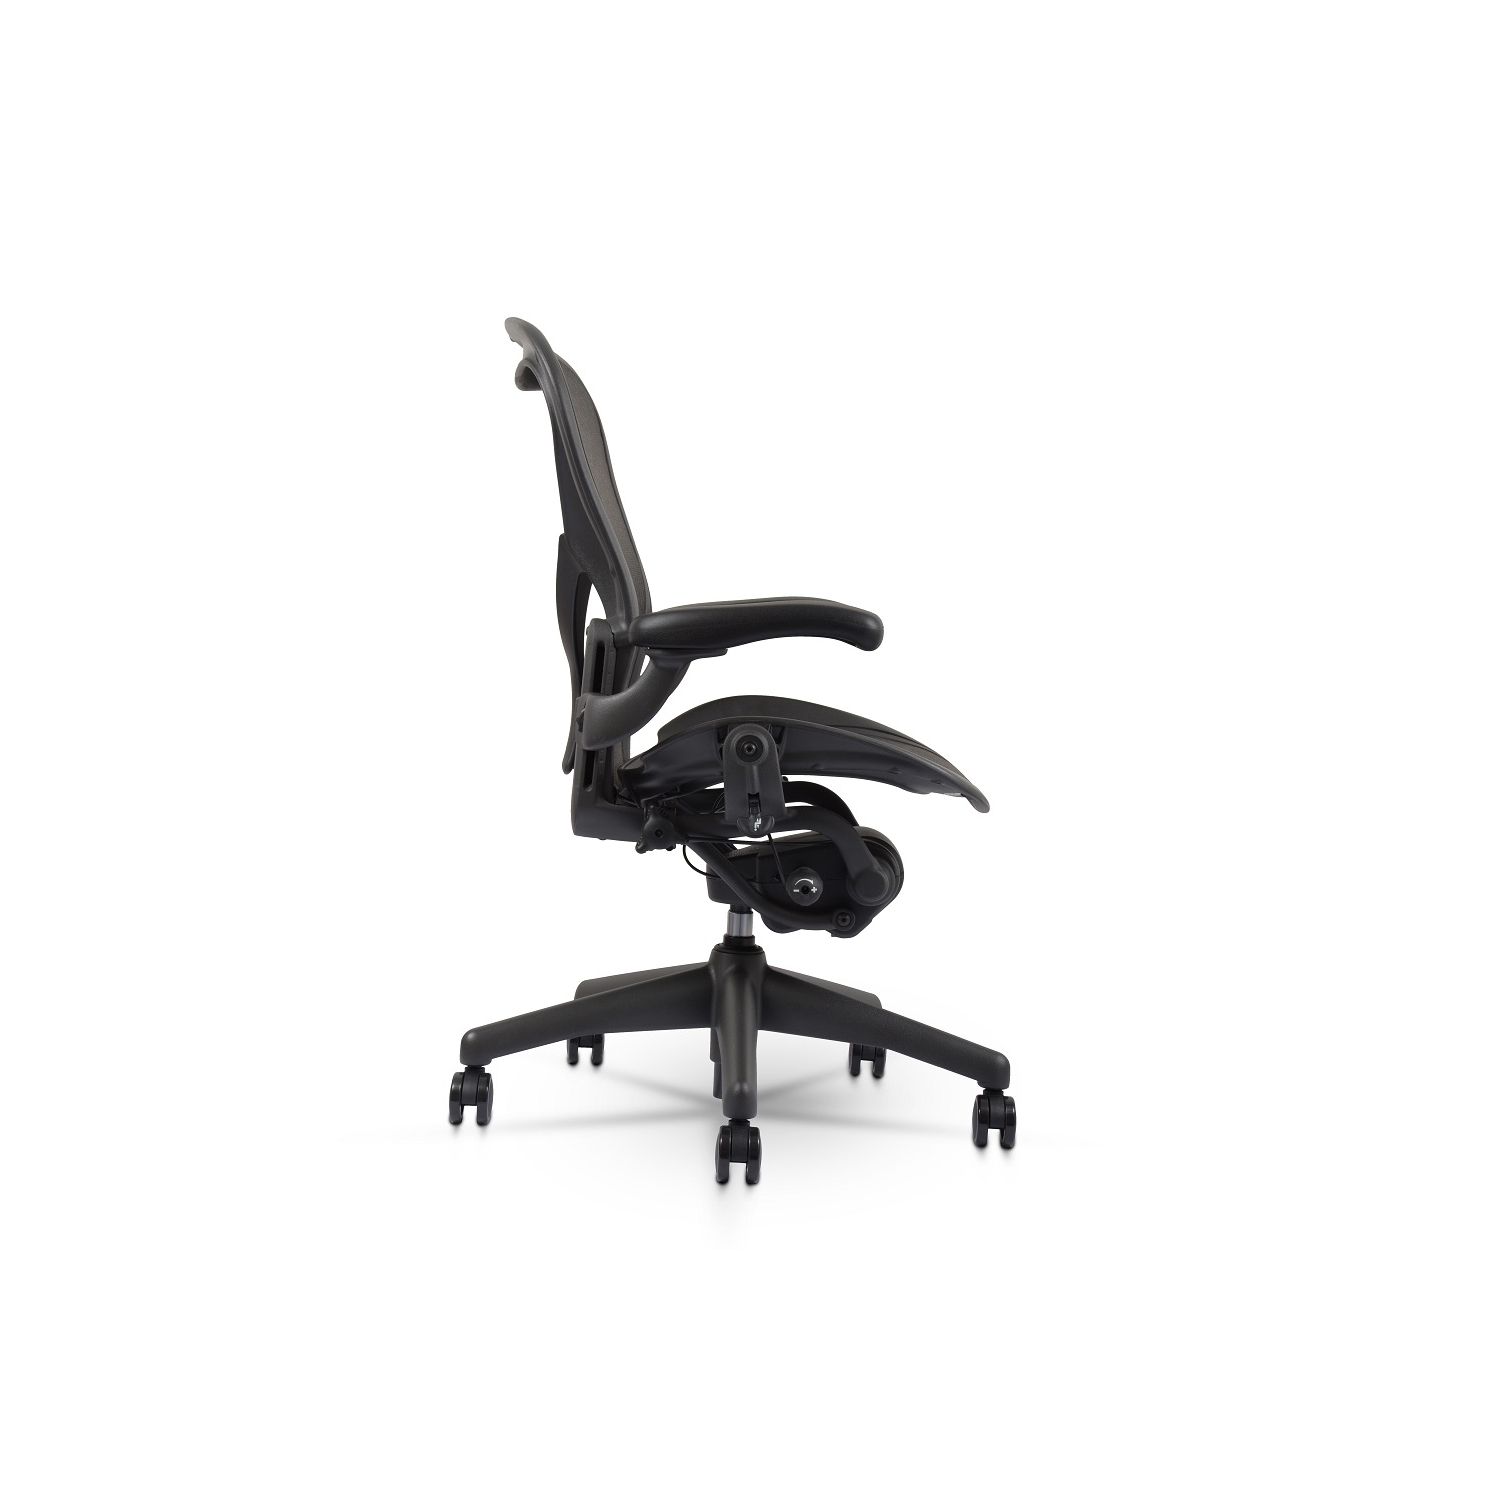 Herman Miller Aeron Chair, Size B, All Features, Fully Adjustable Arms,  Tilt Limiter and Seat Angle, Adjustable Posturefit